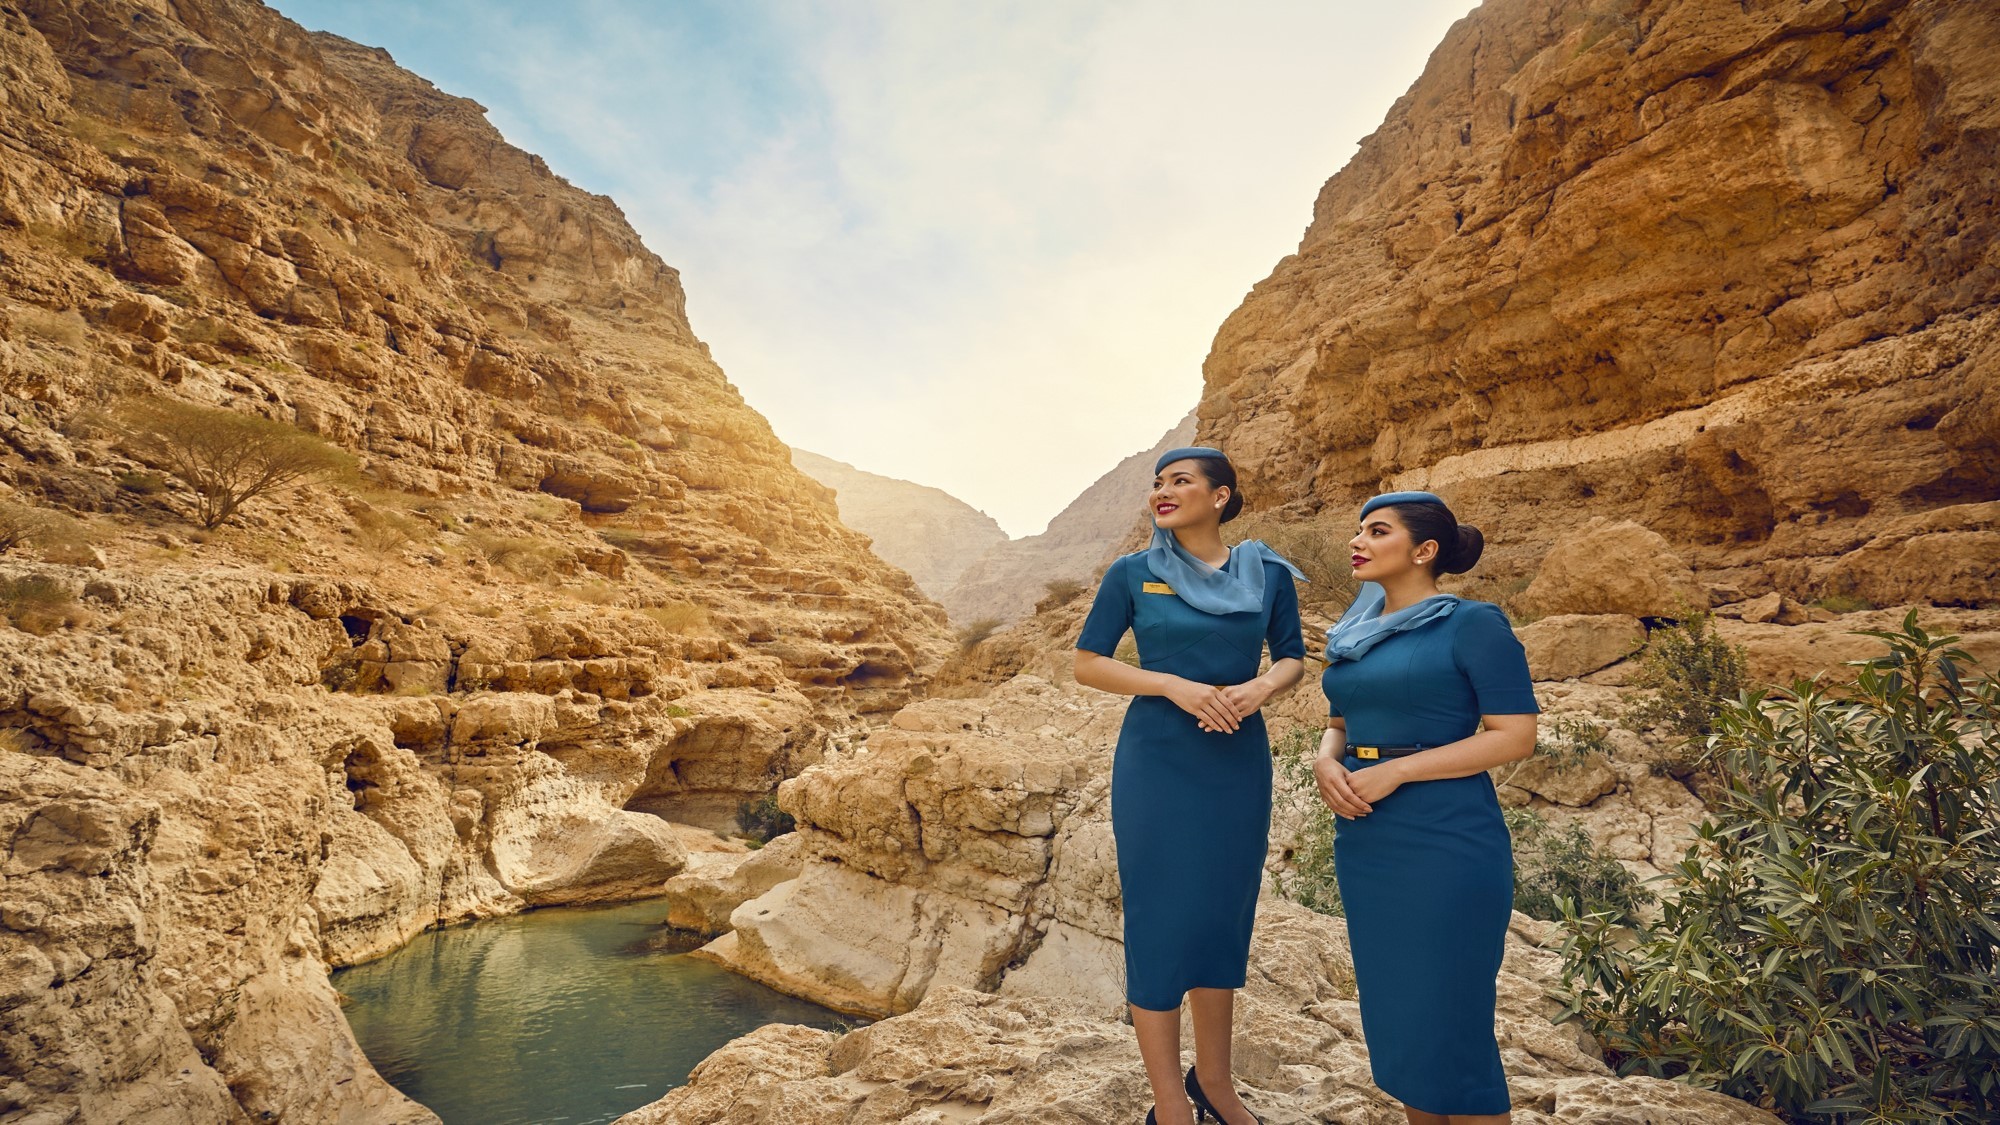 Discover the hidden water caves at Wadi Shab